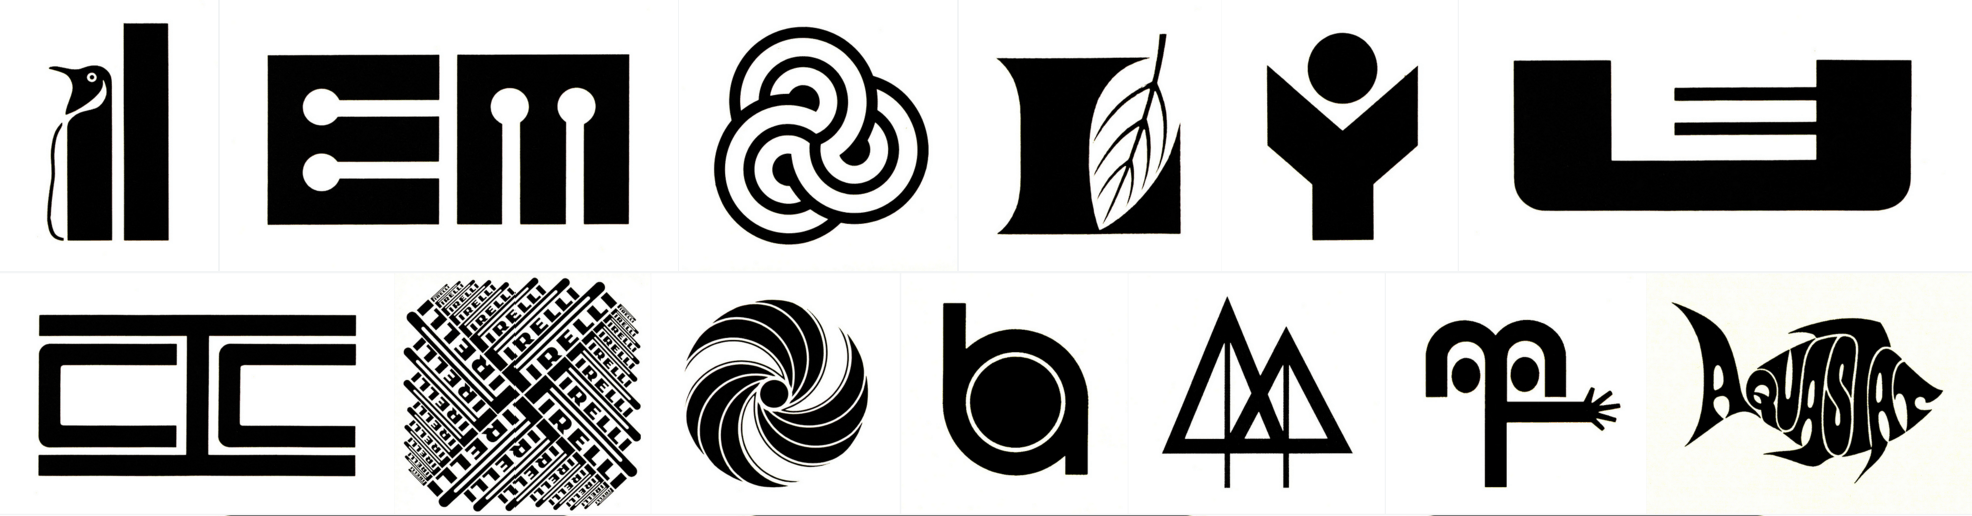 1970s Logo - Monochrome logos from the 50s and 70s - Hotfoot Design